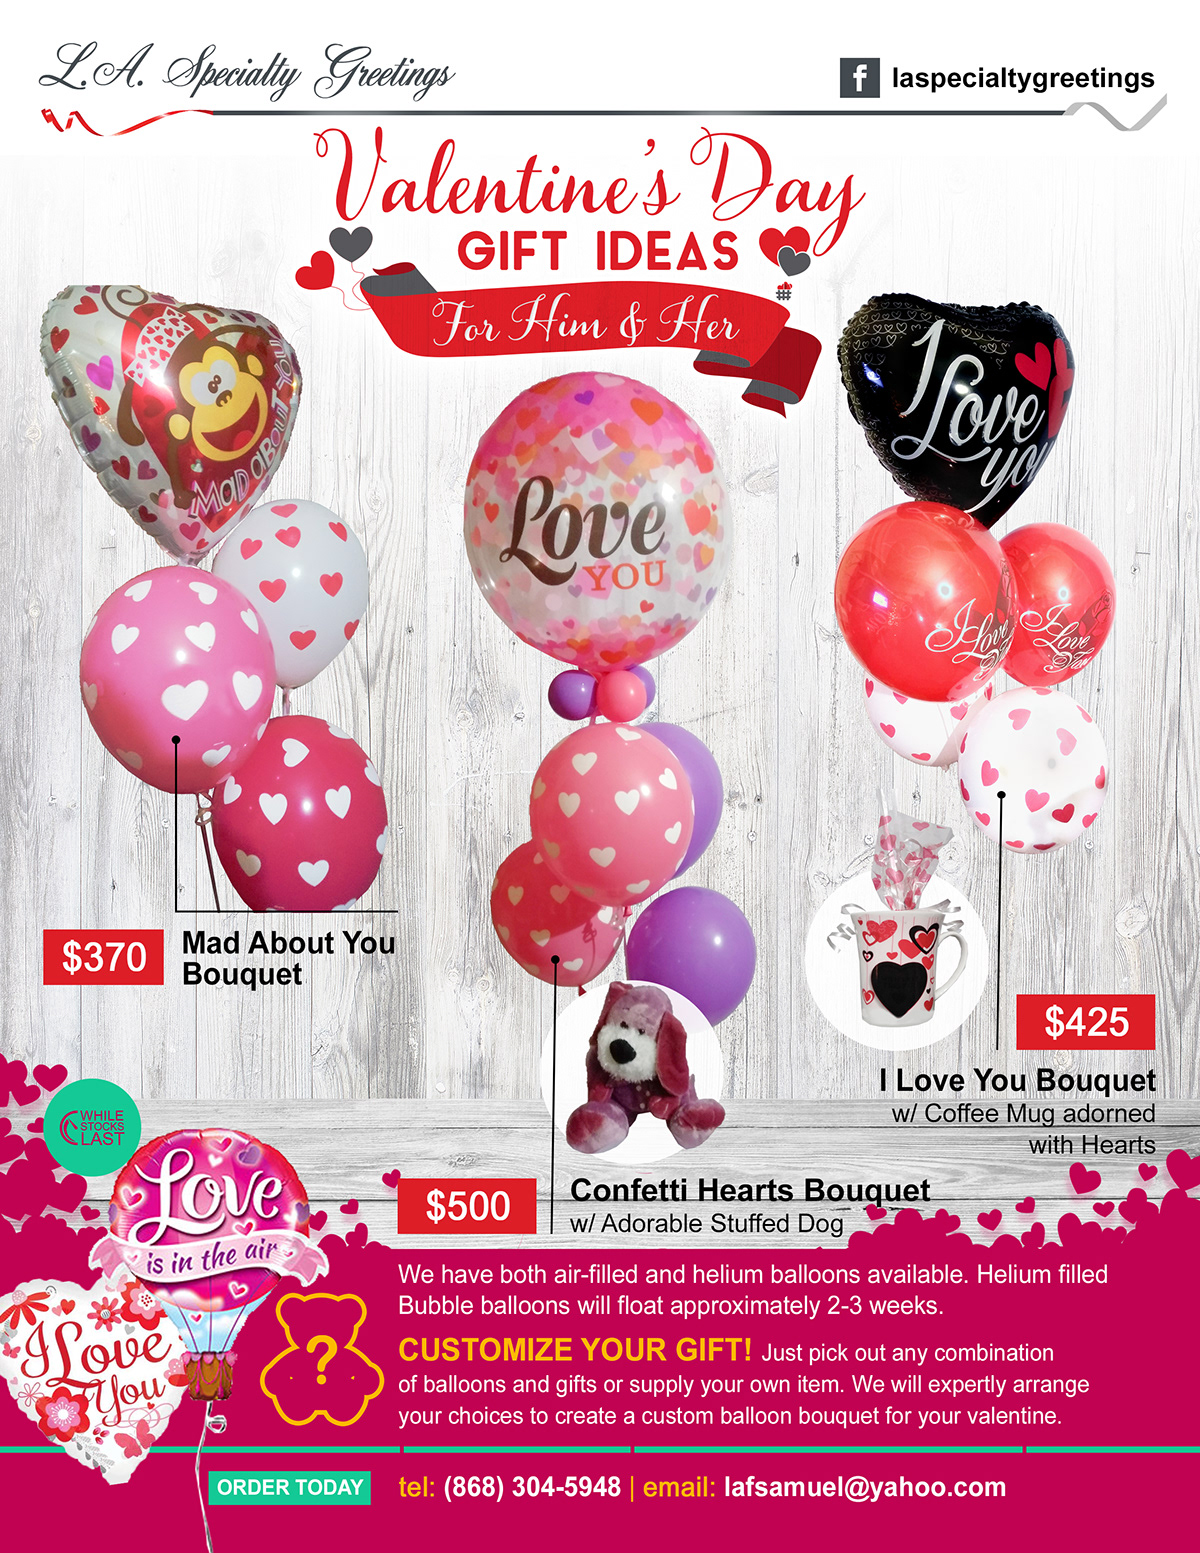 advertisement flyer social media poster Valentine's Day Promotion